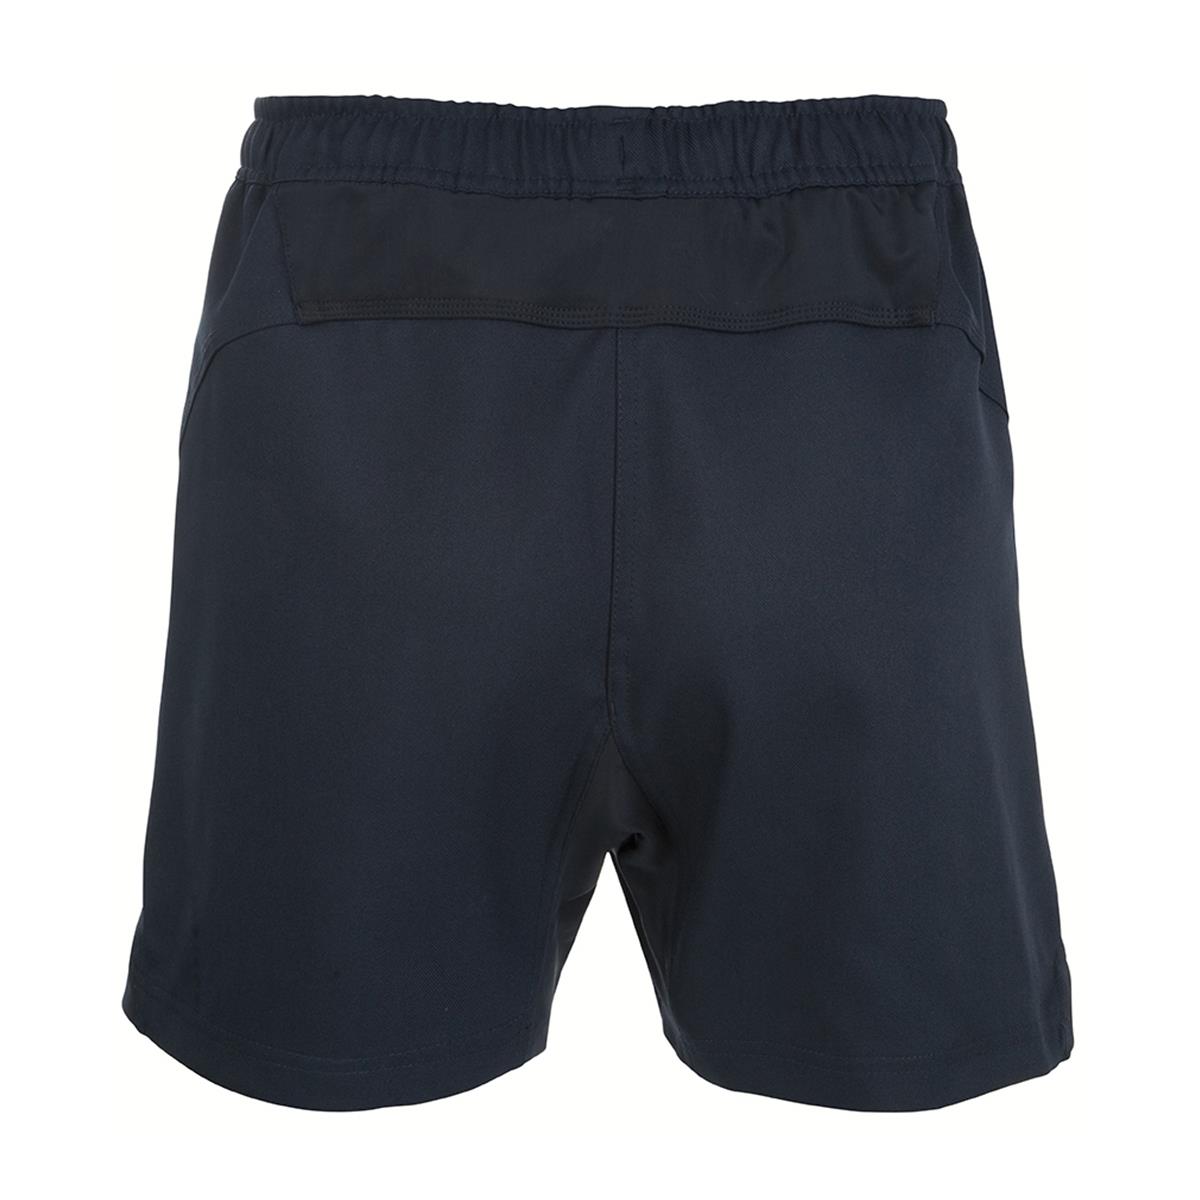 Unbranded Teamwear Pro Shorts Navy | rugbystore